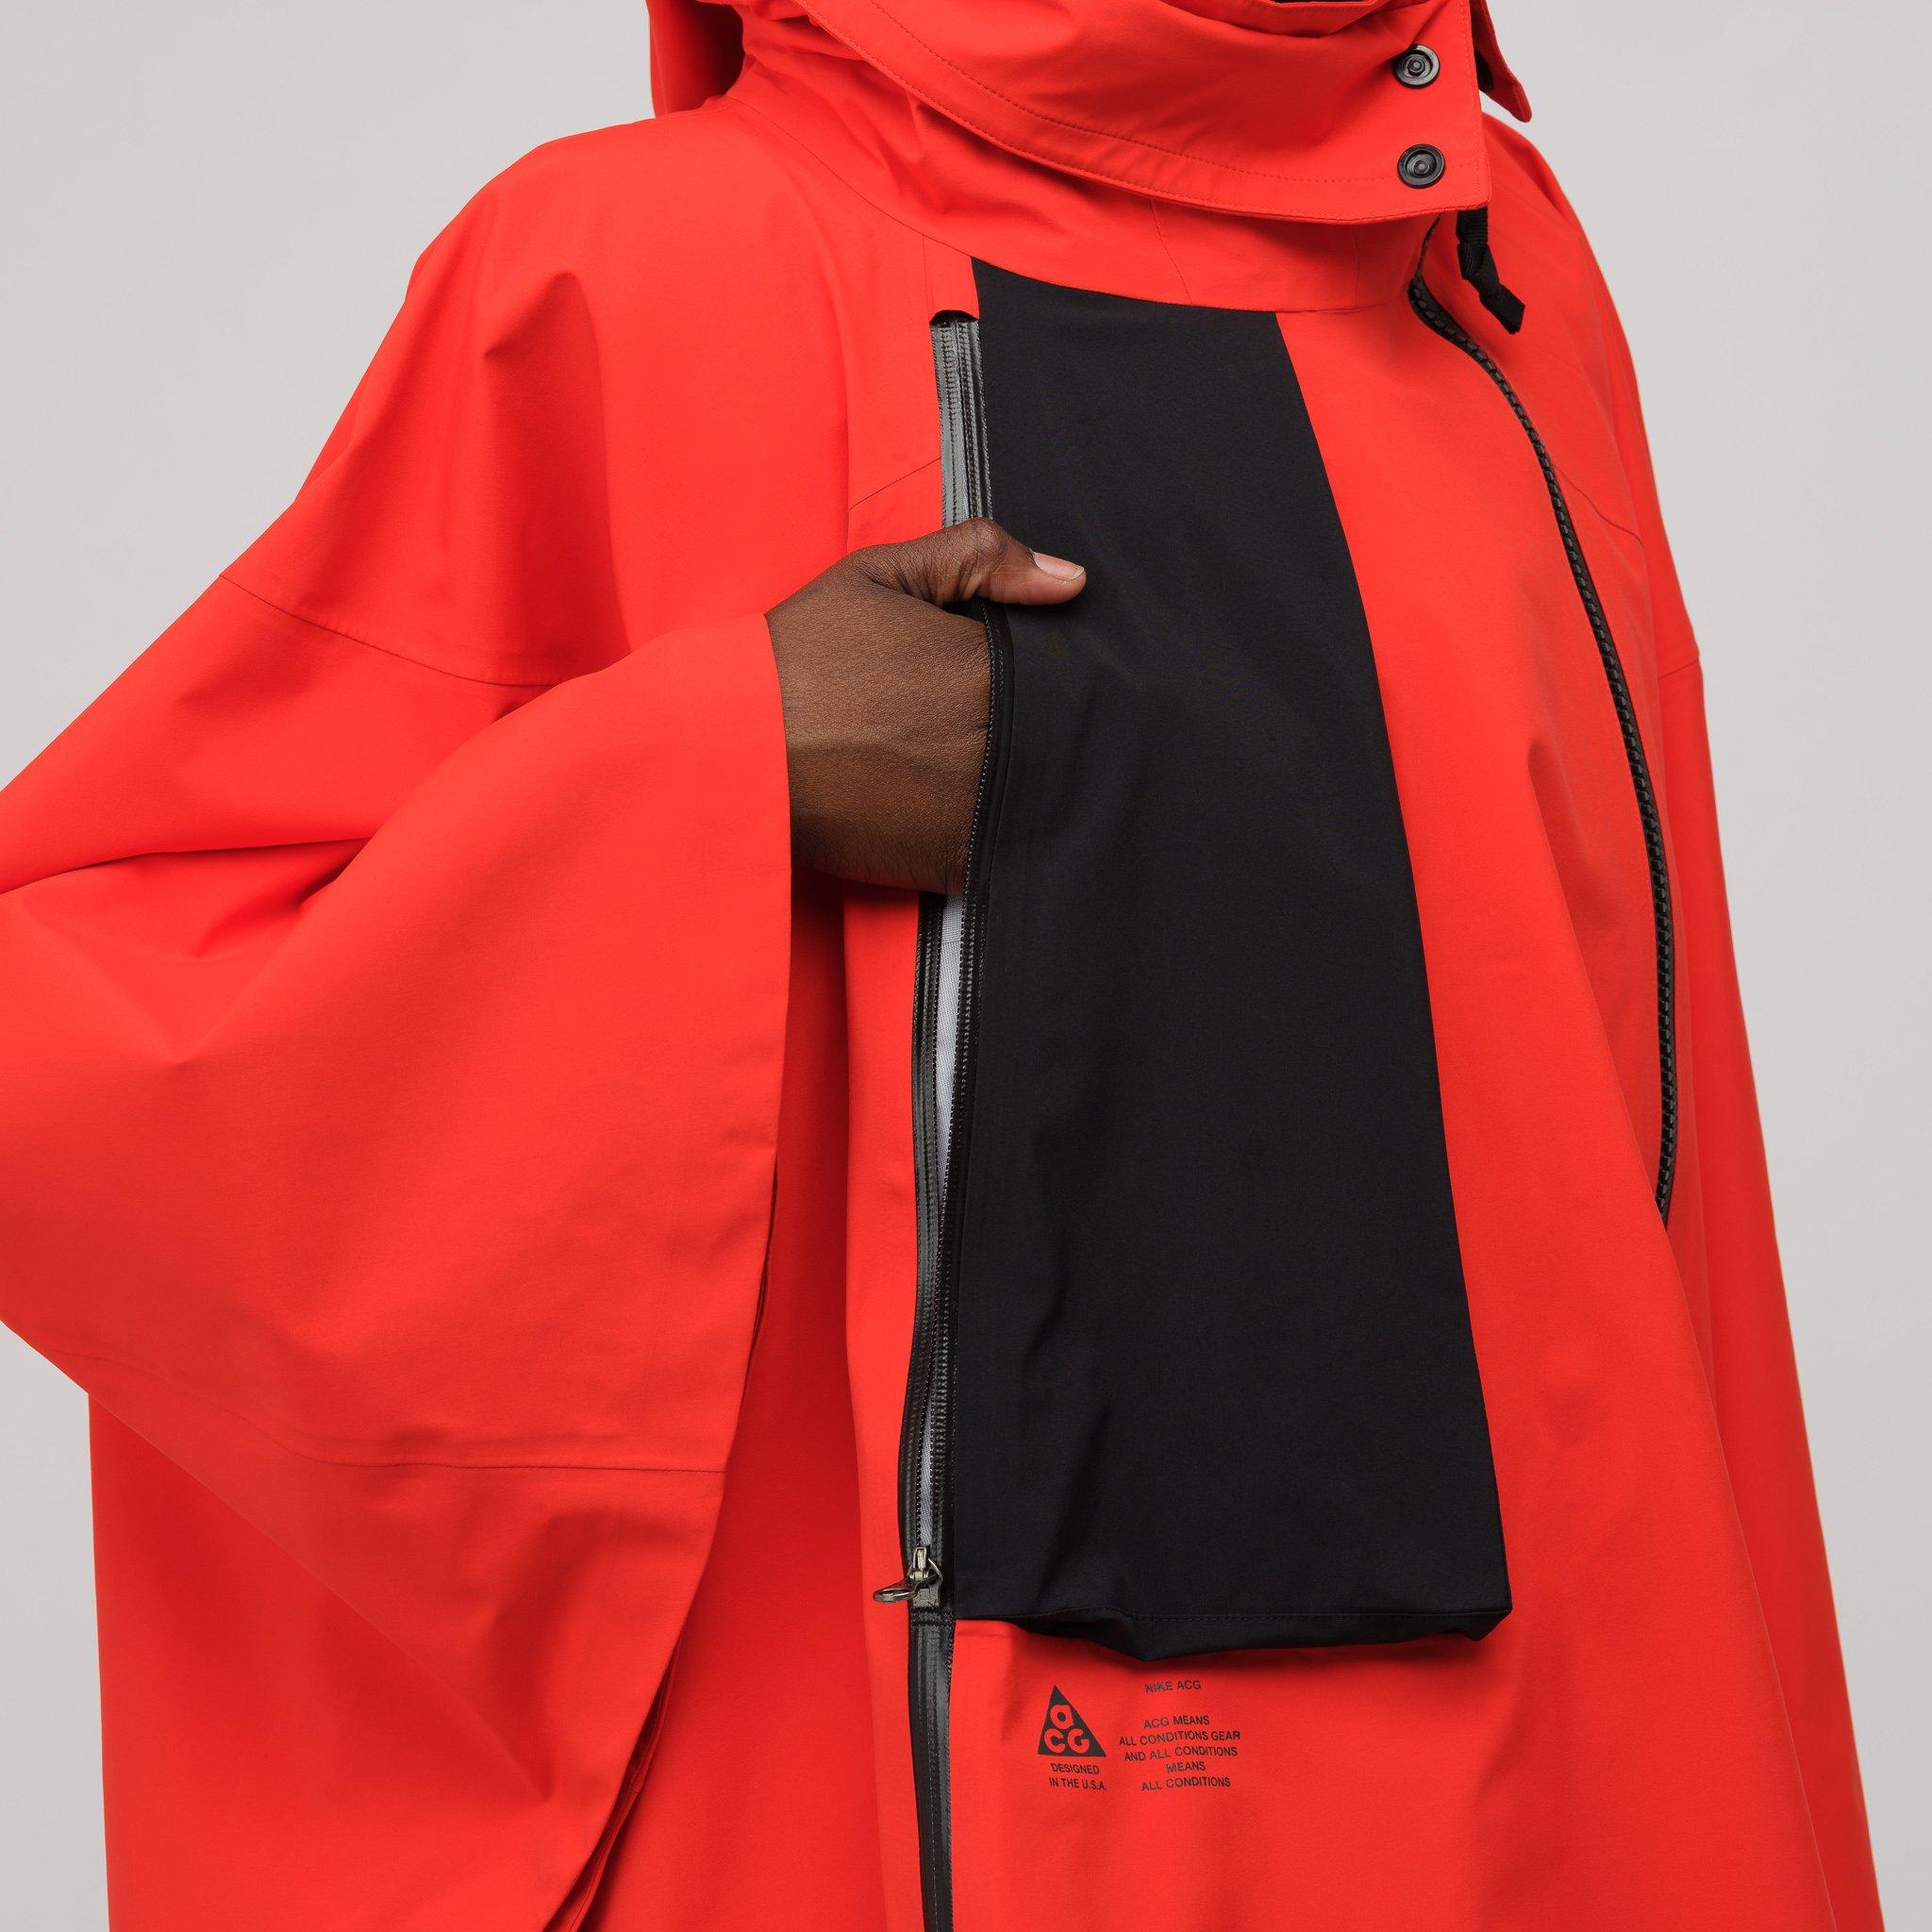 Nike Synthetic Acg 3-in-1 System Poncho in Red for Men - Lyst